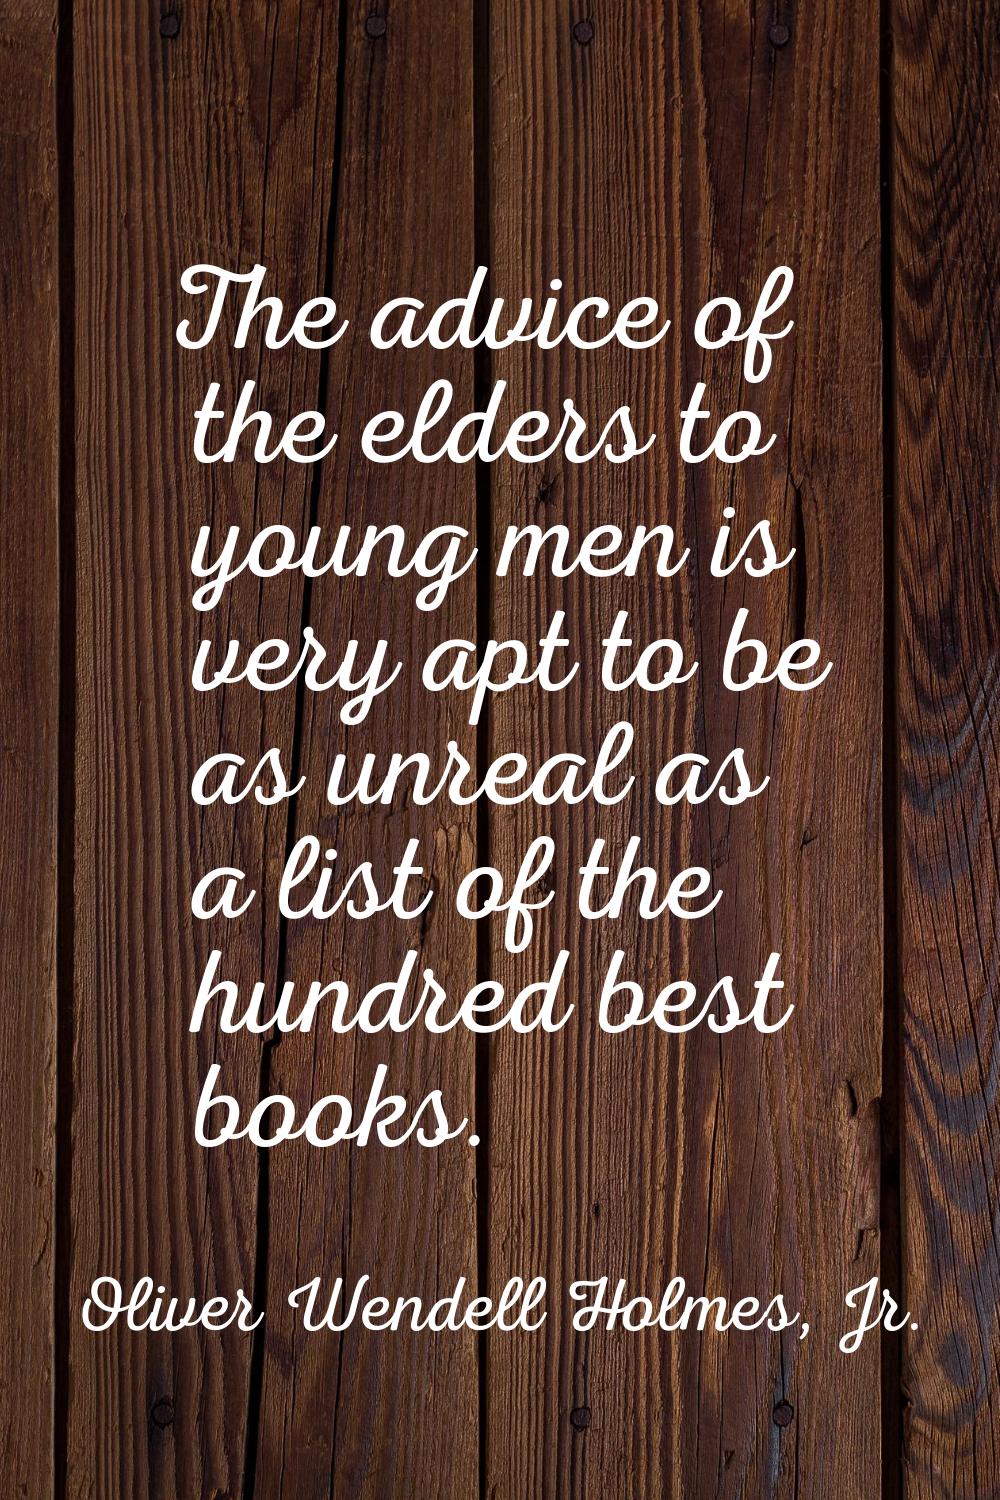 The advice of the elders to young men is very apt to be as unreal as a list of the hundred best boo